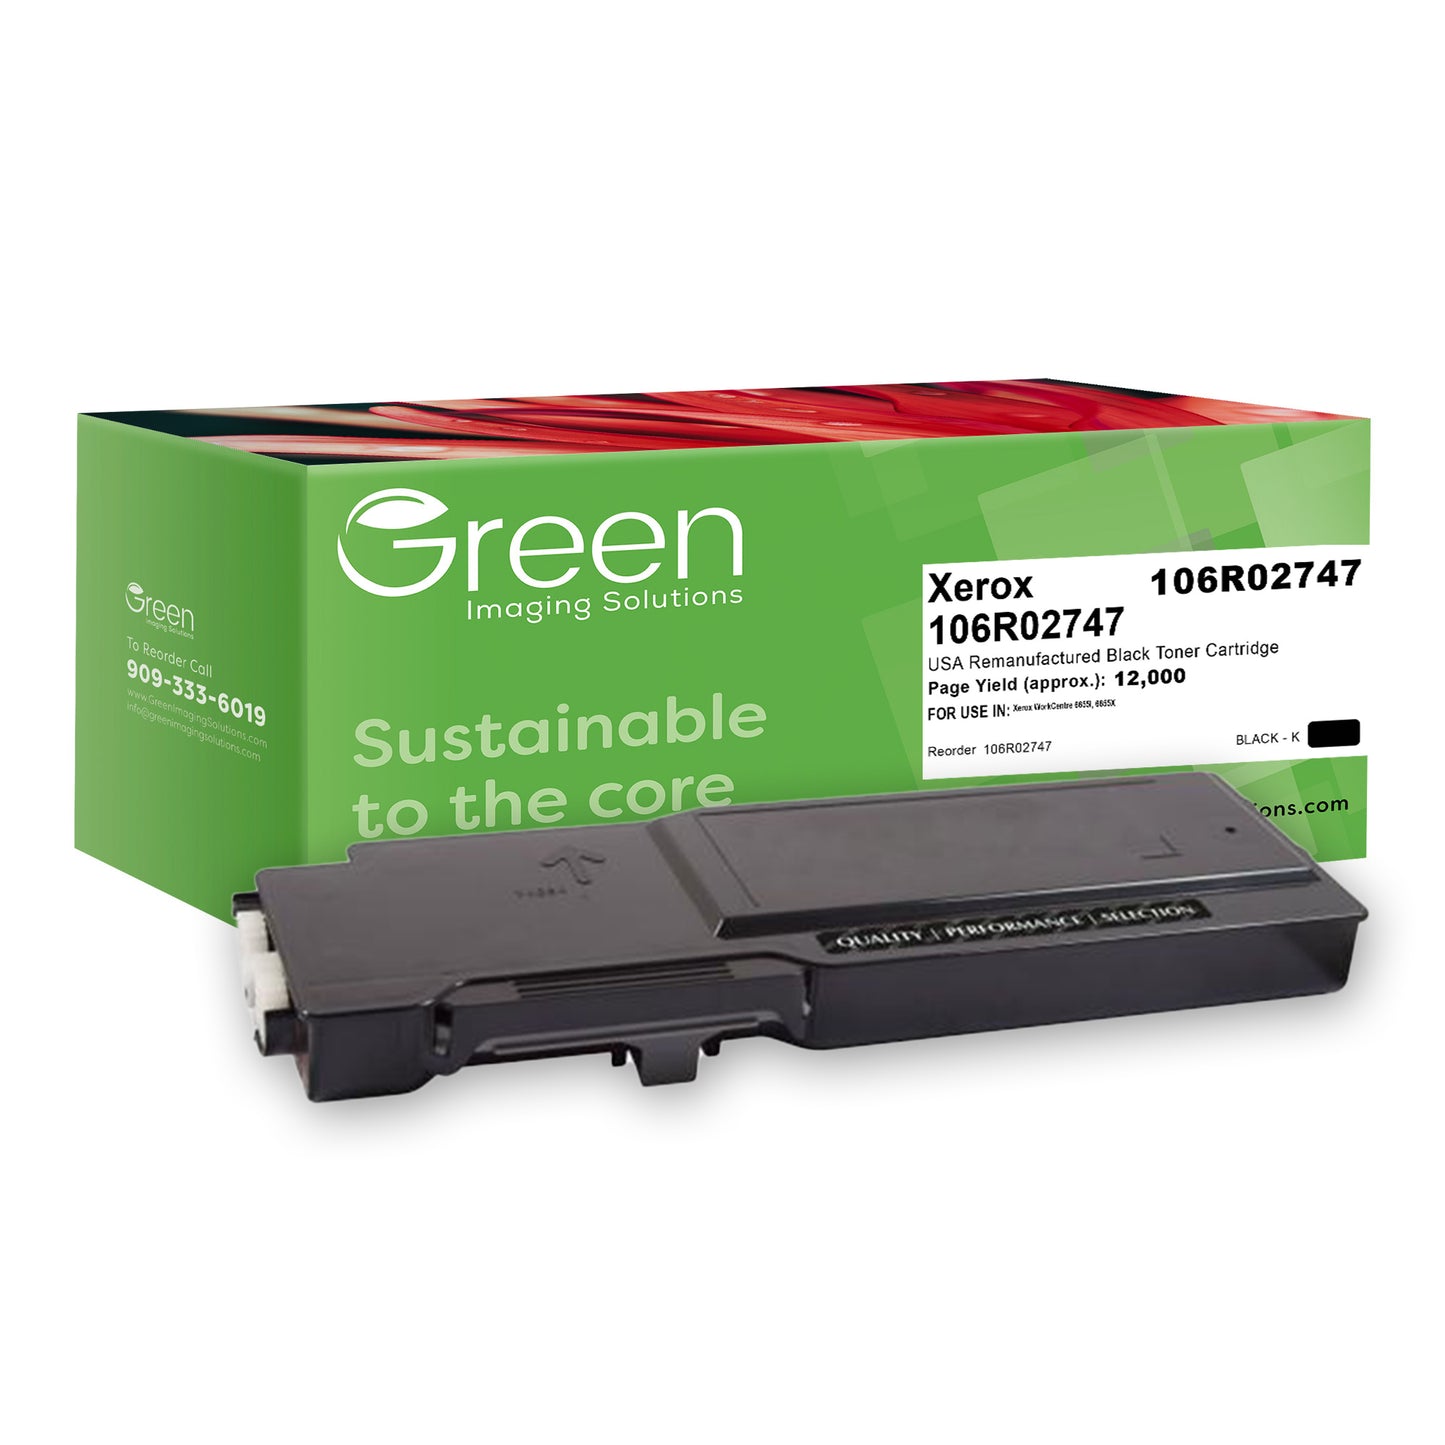 Green Imaging Solutions USA Remanufactured Black Toner Cartridge for Xerox 106R02747